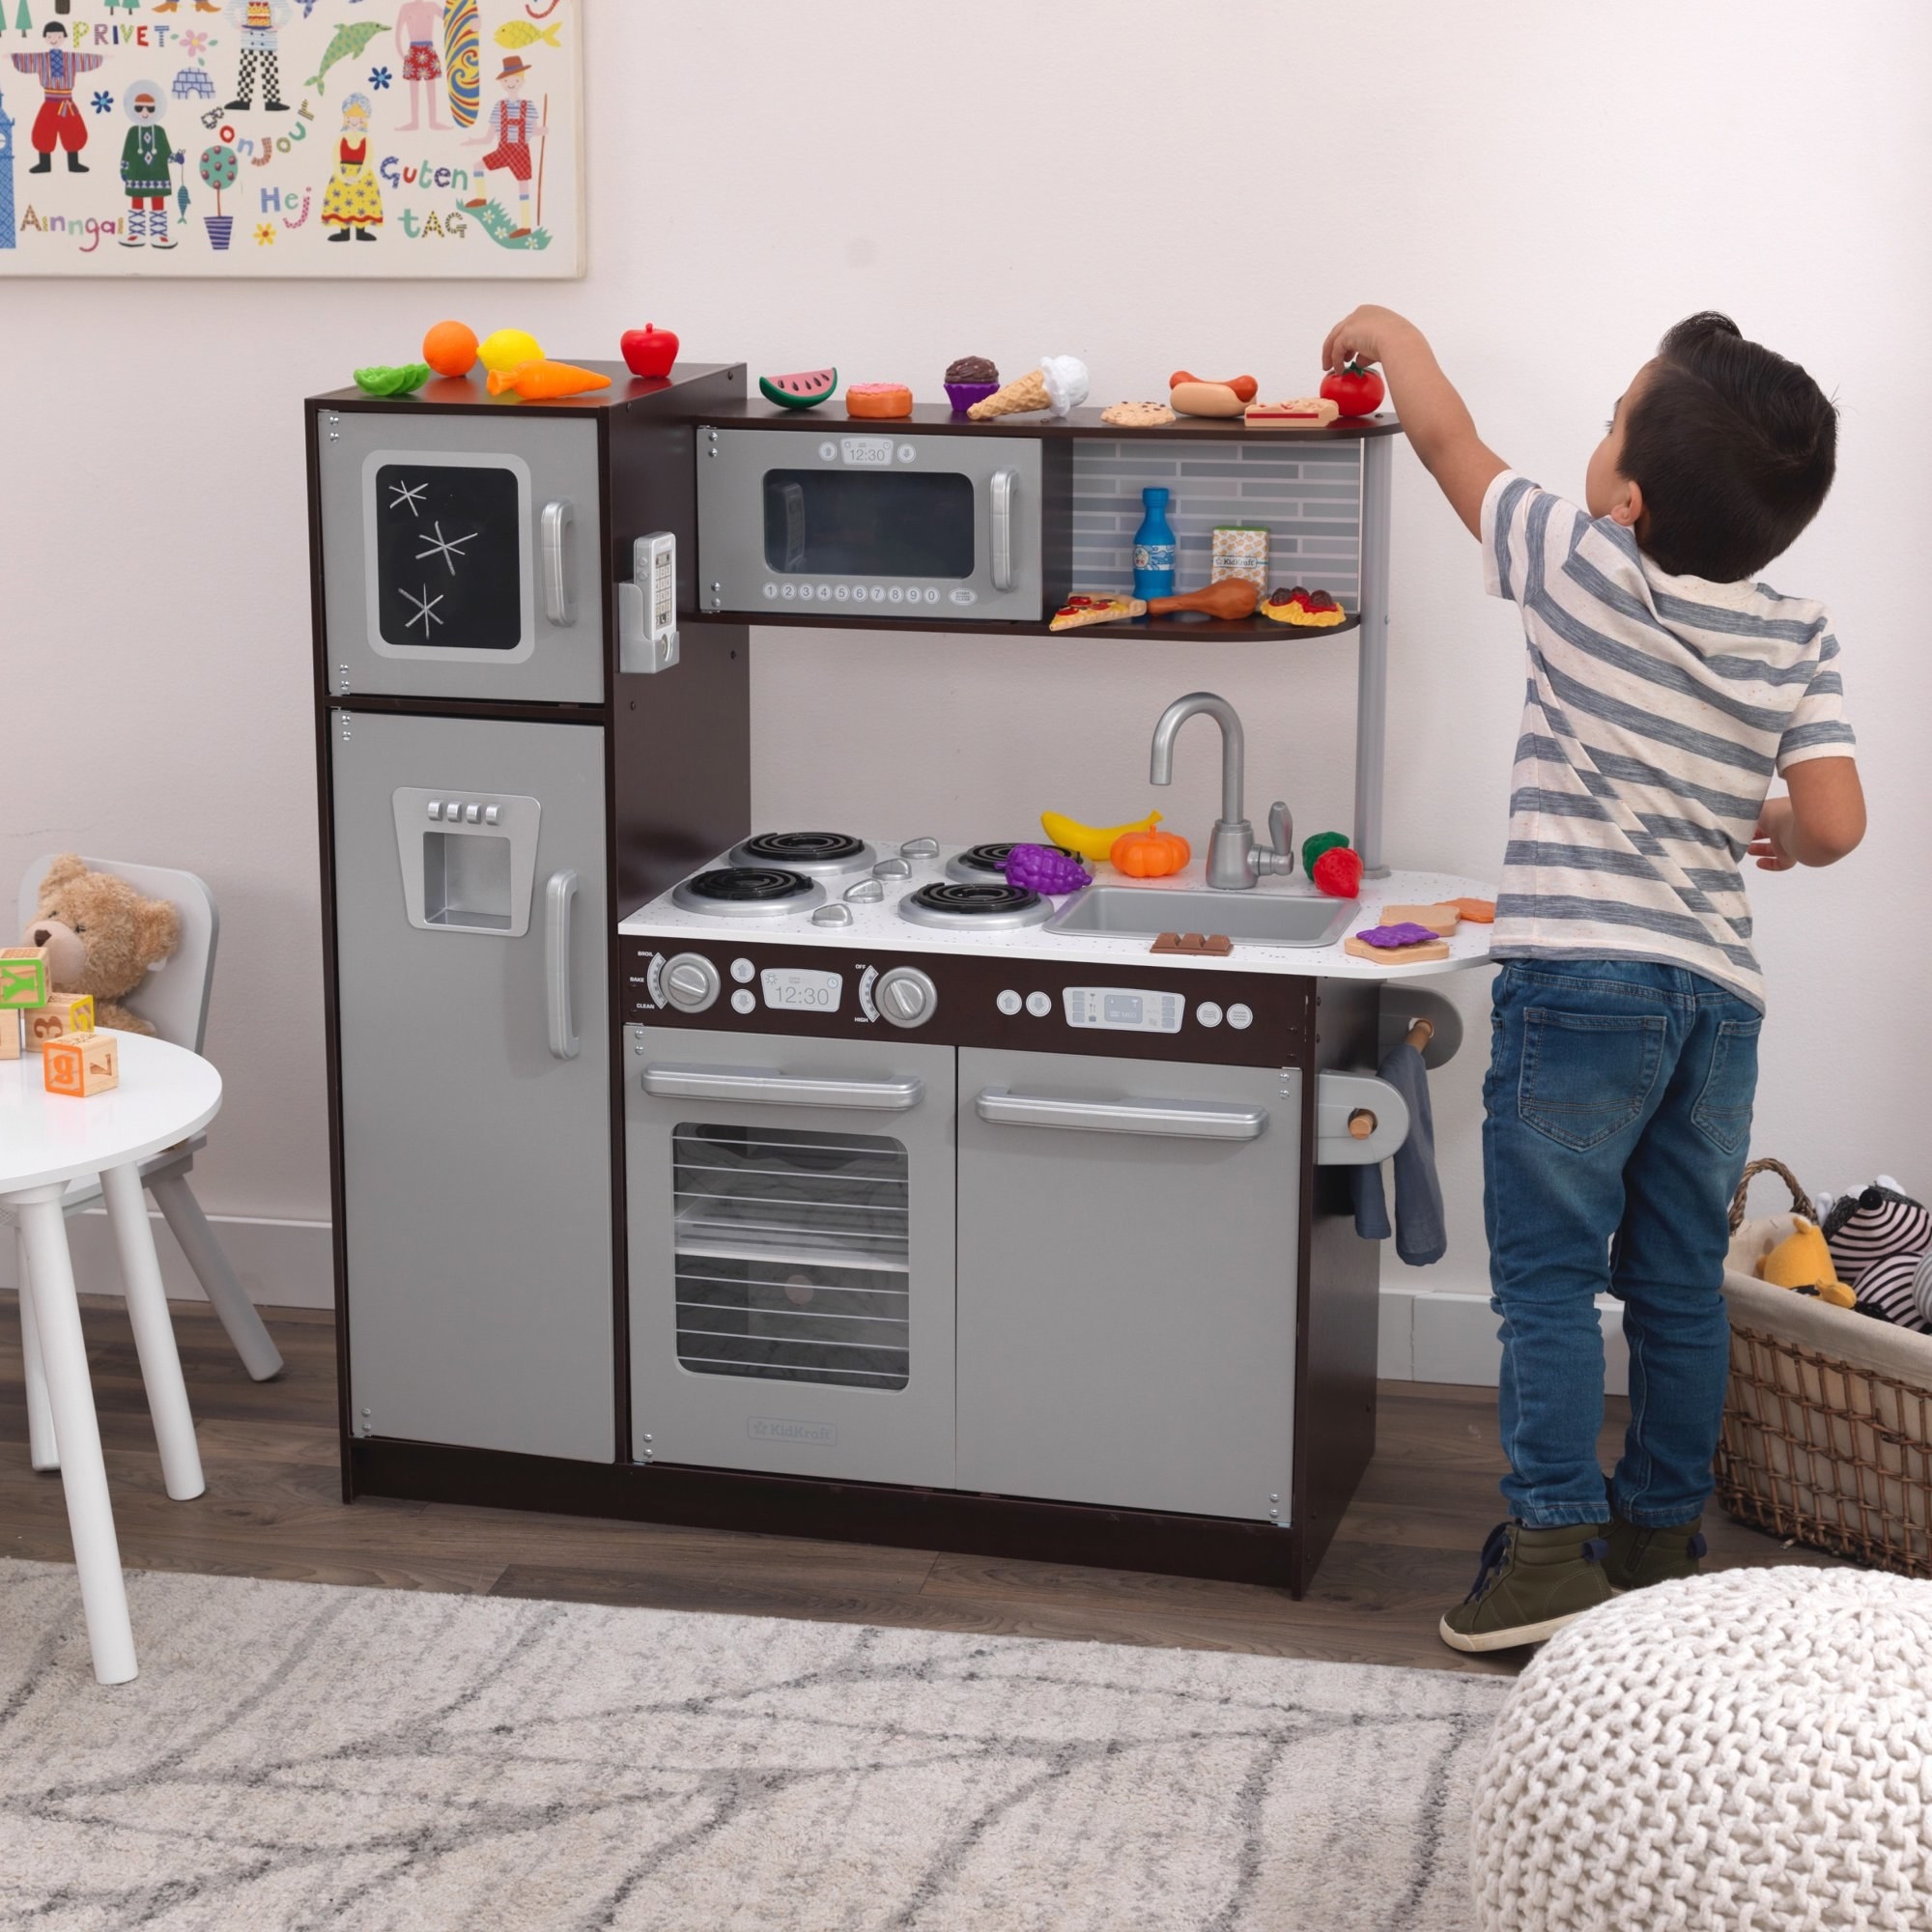 Kid playing in kitchen